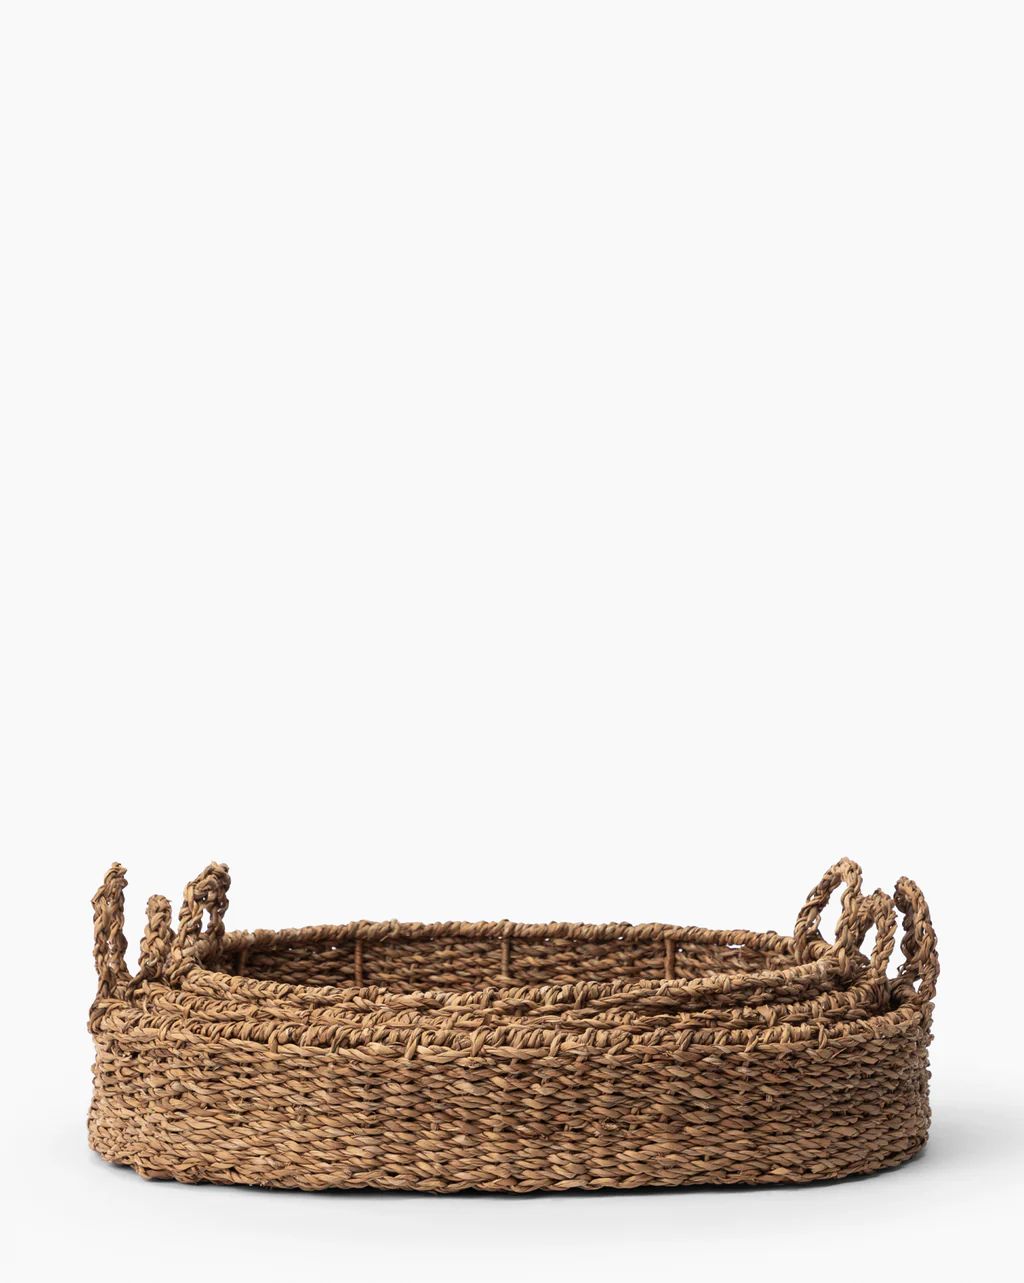 Seagrass Oval Tray | McGee & Co.